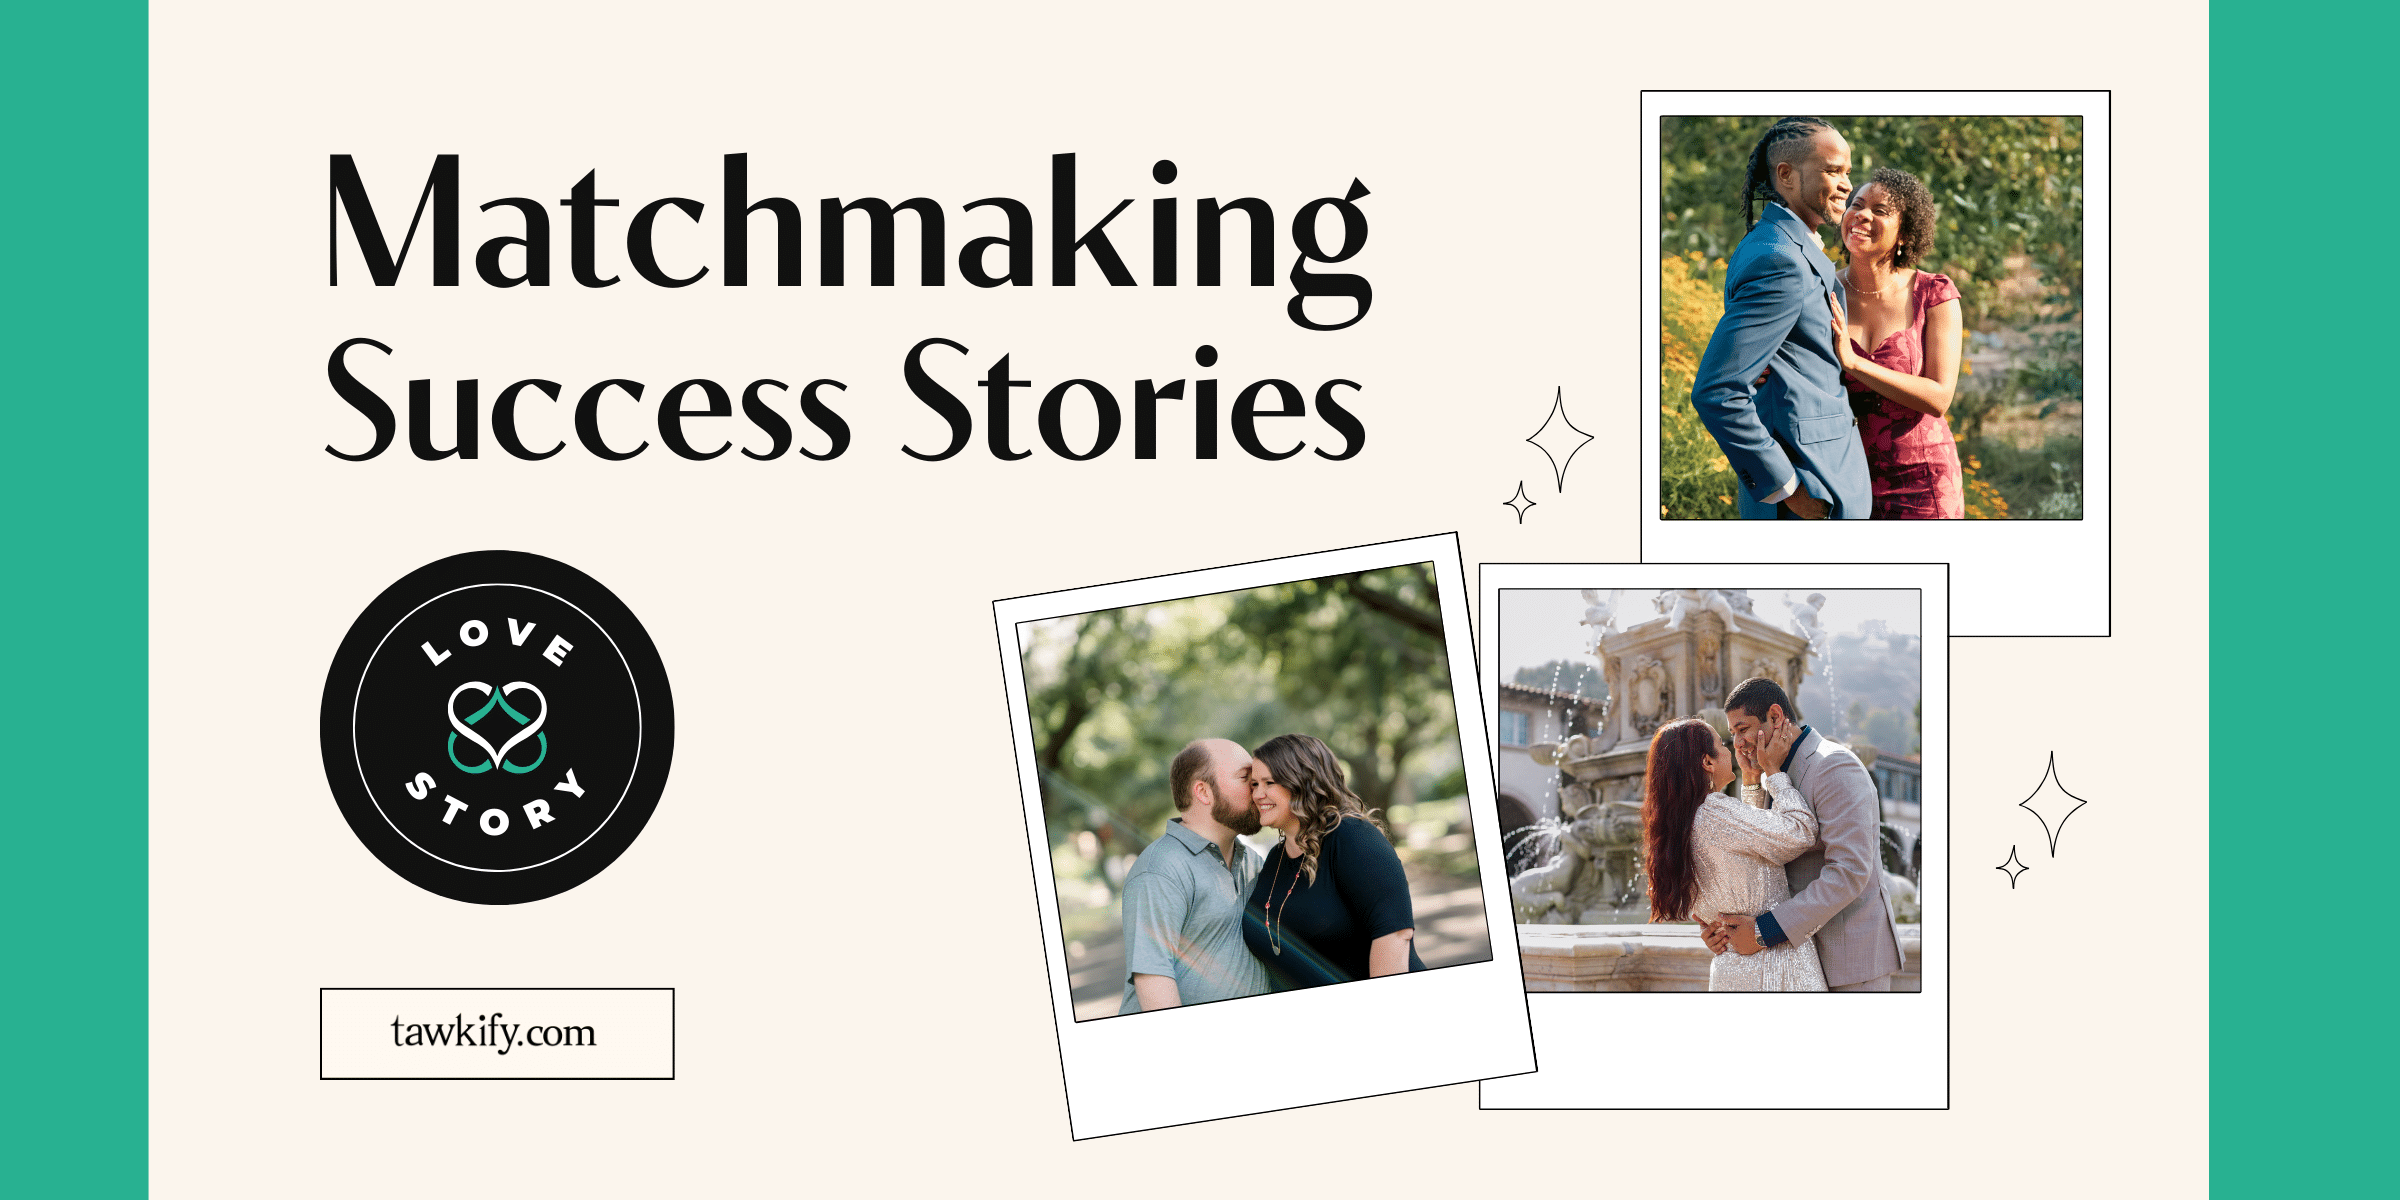 Hear from real Tawkify couples about their matchmaking success stories! Find your person and start your journey to love.